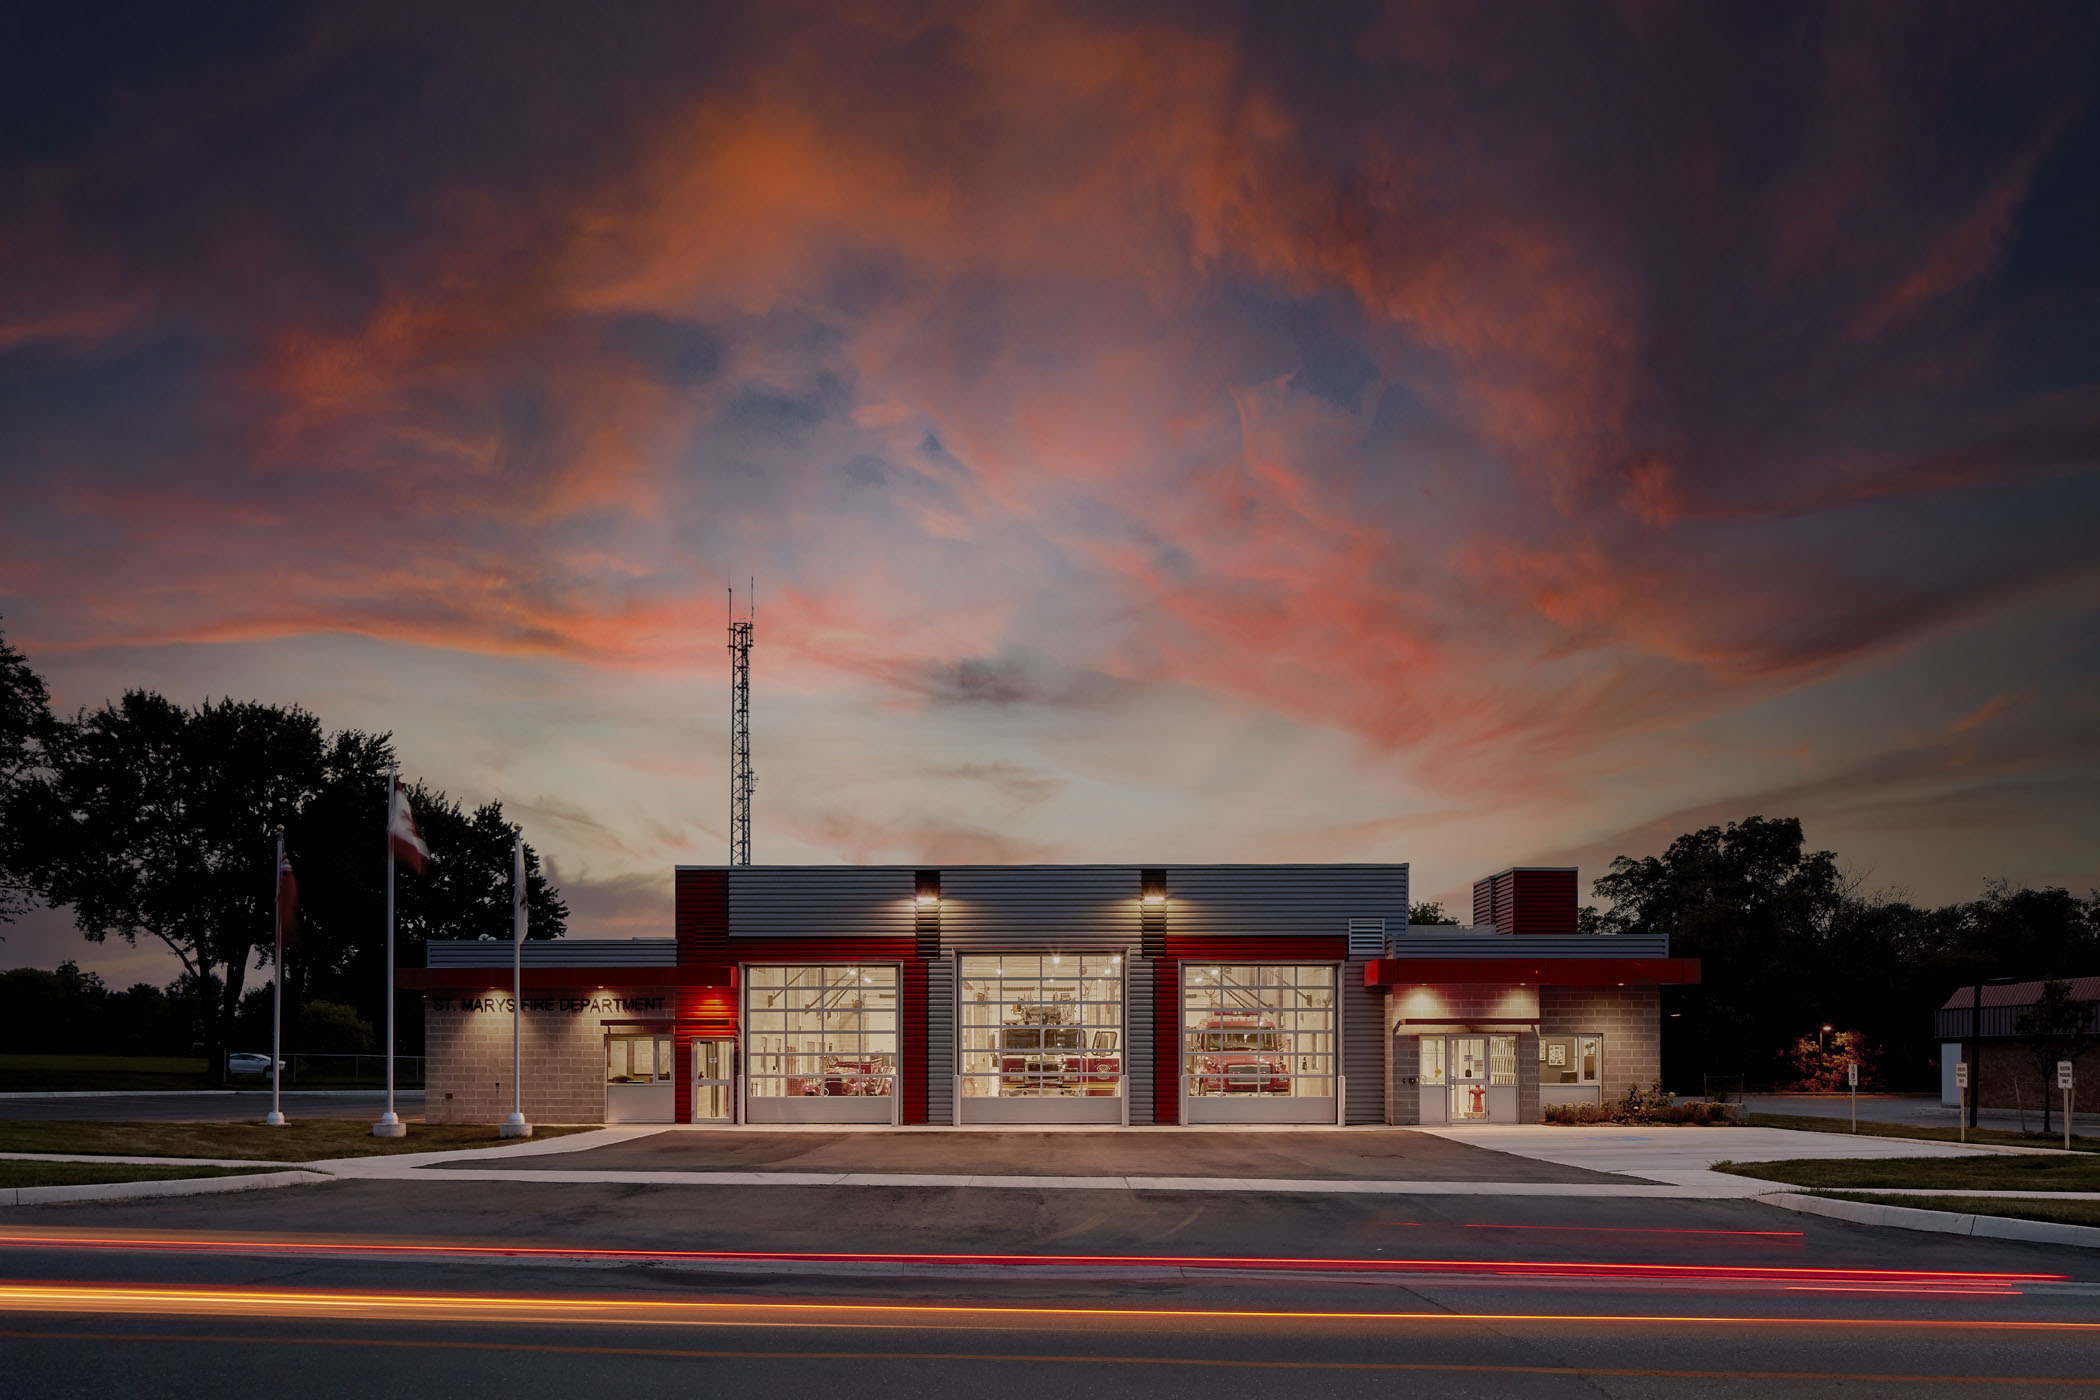 The fire station at sunset.